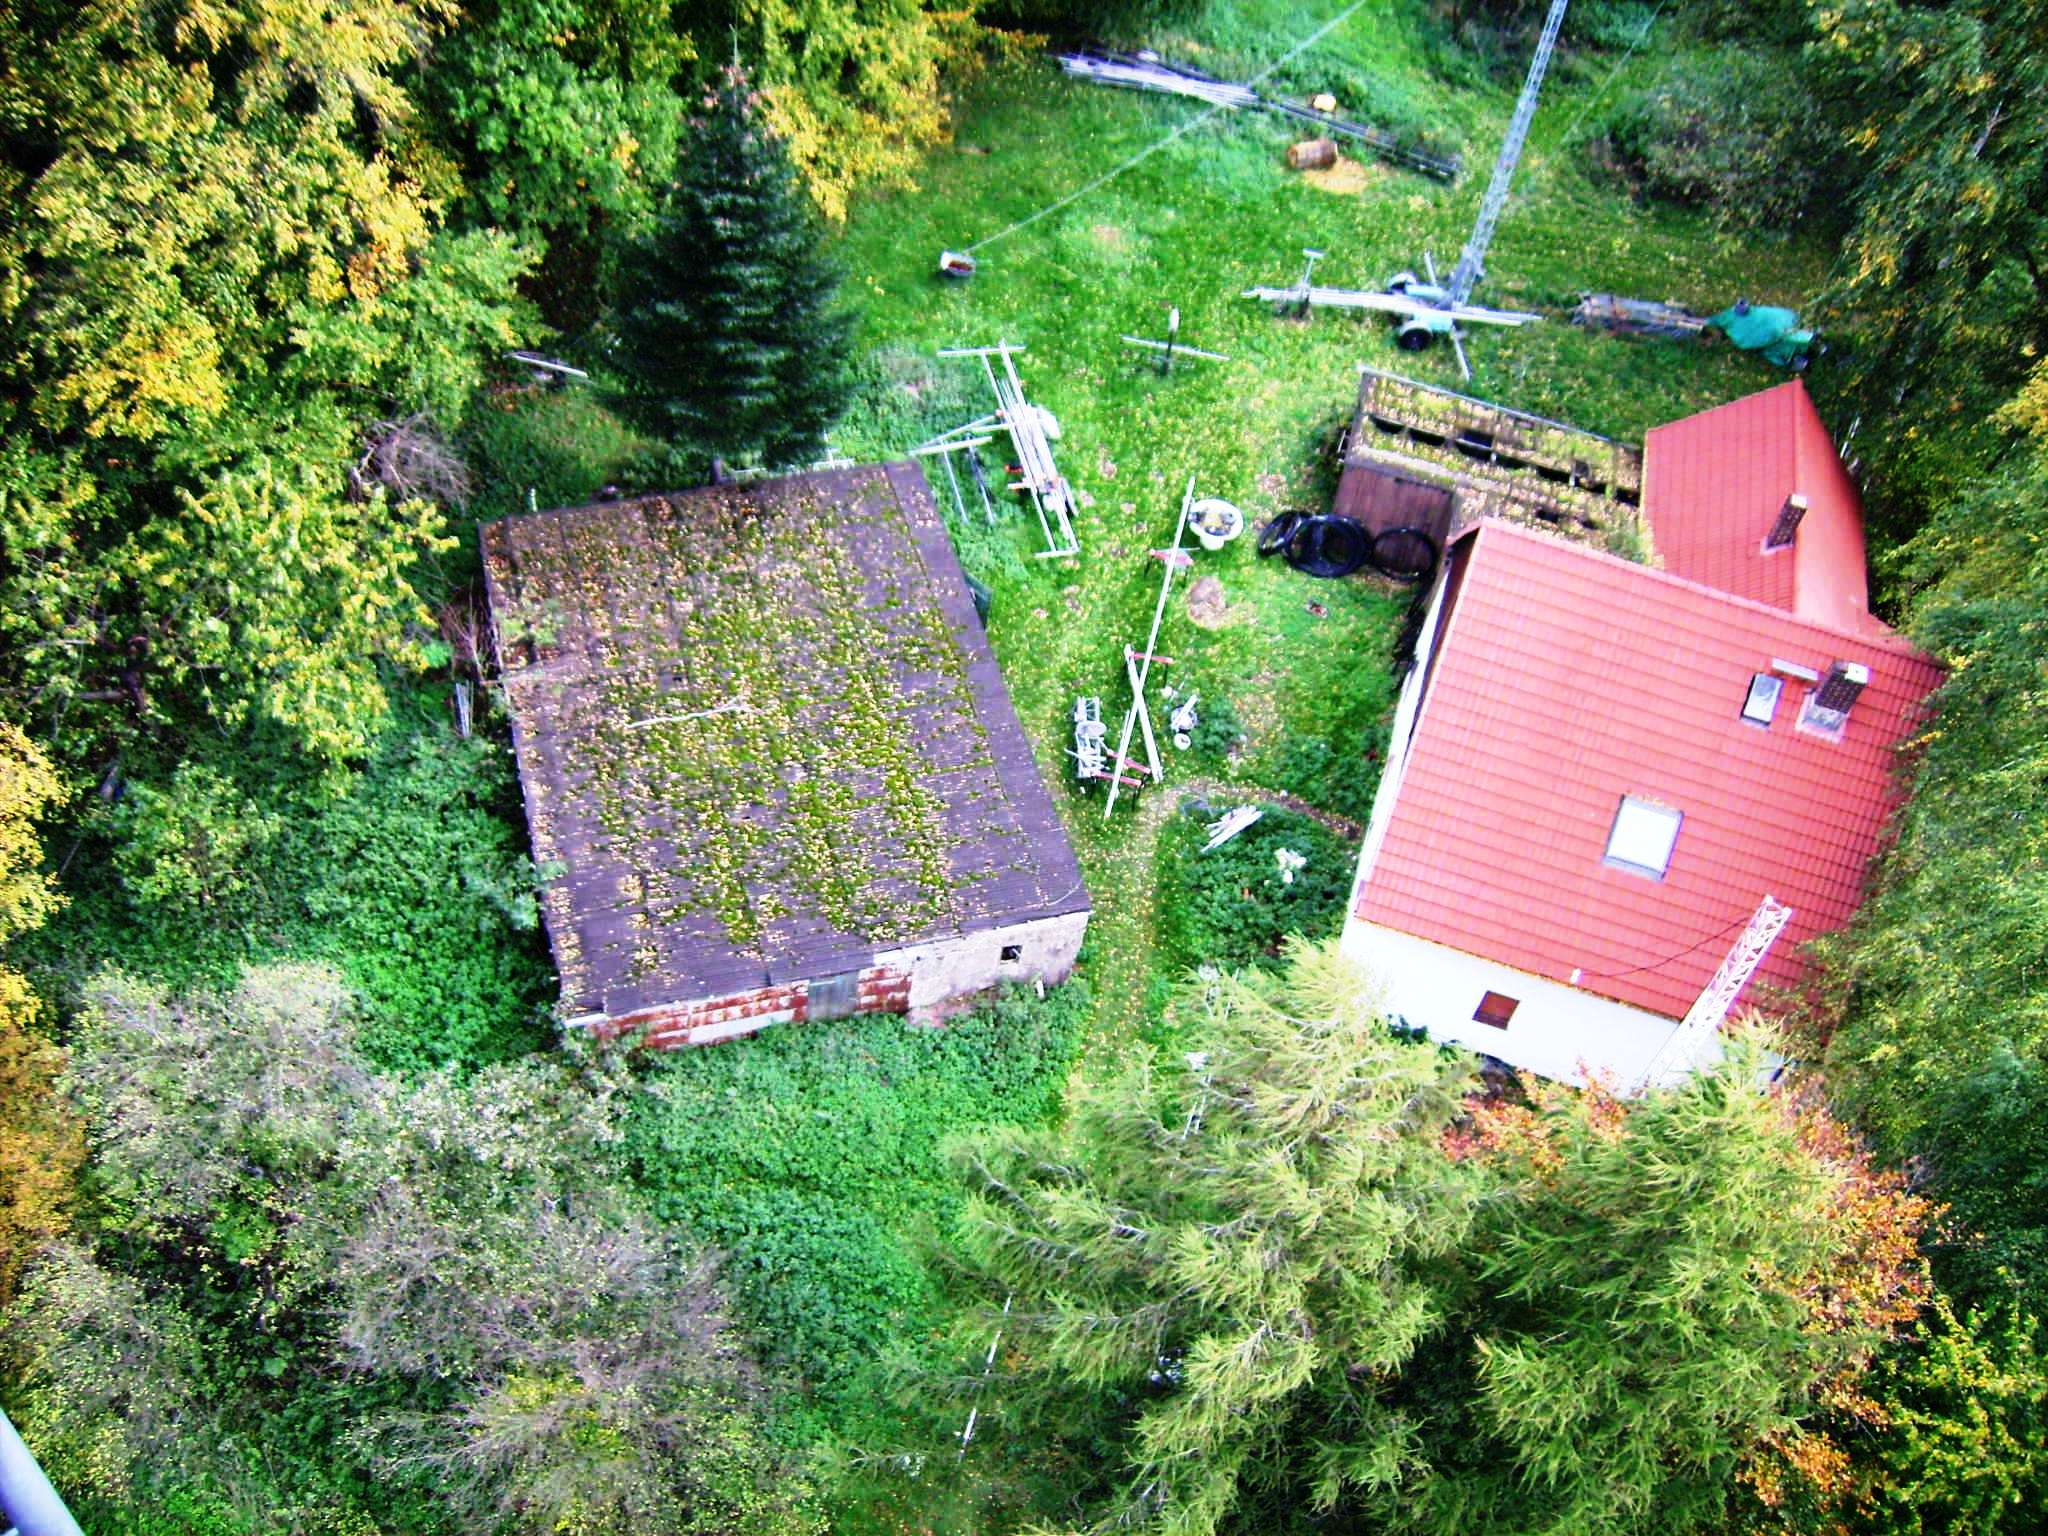 looking down to the house